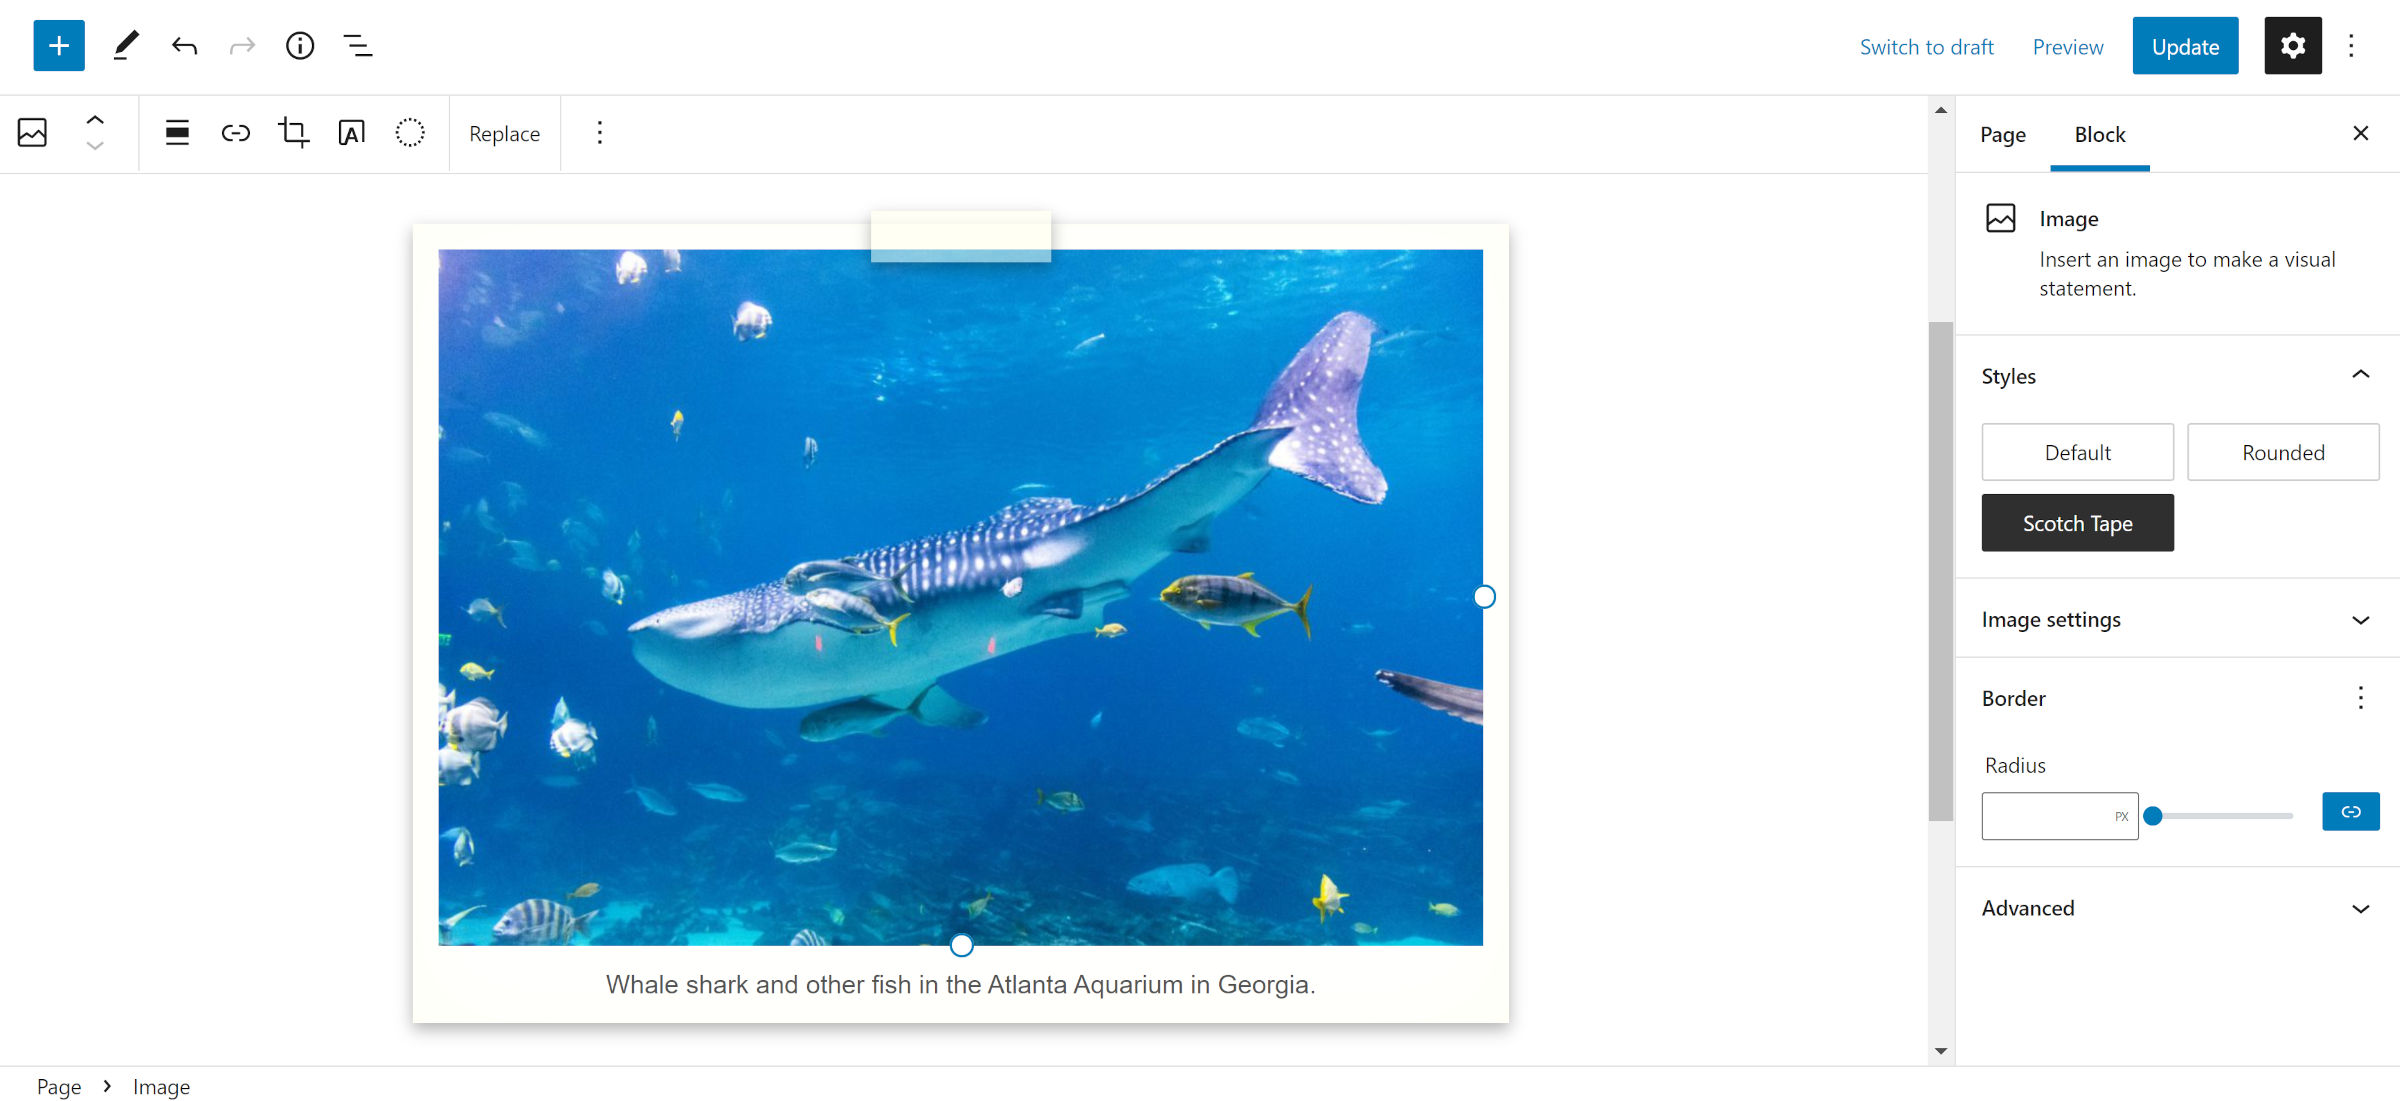 WordPress post editor with an photo of a whale shark in the content canvas.  It has a Polaroid-style border with a piece of tape that appears to be holding it up.